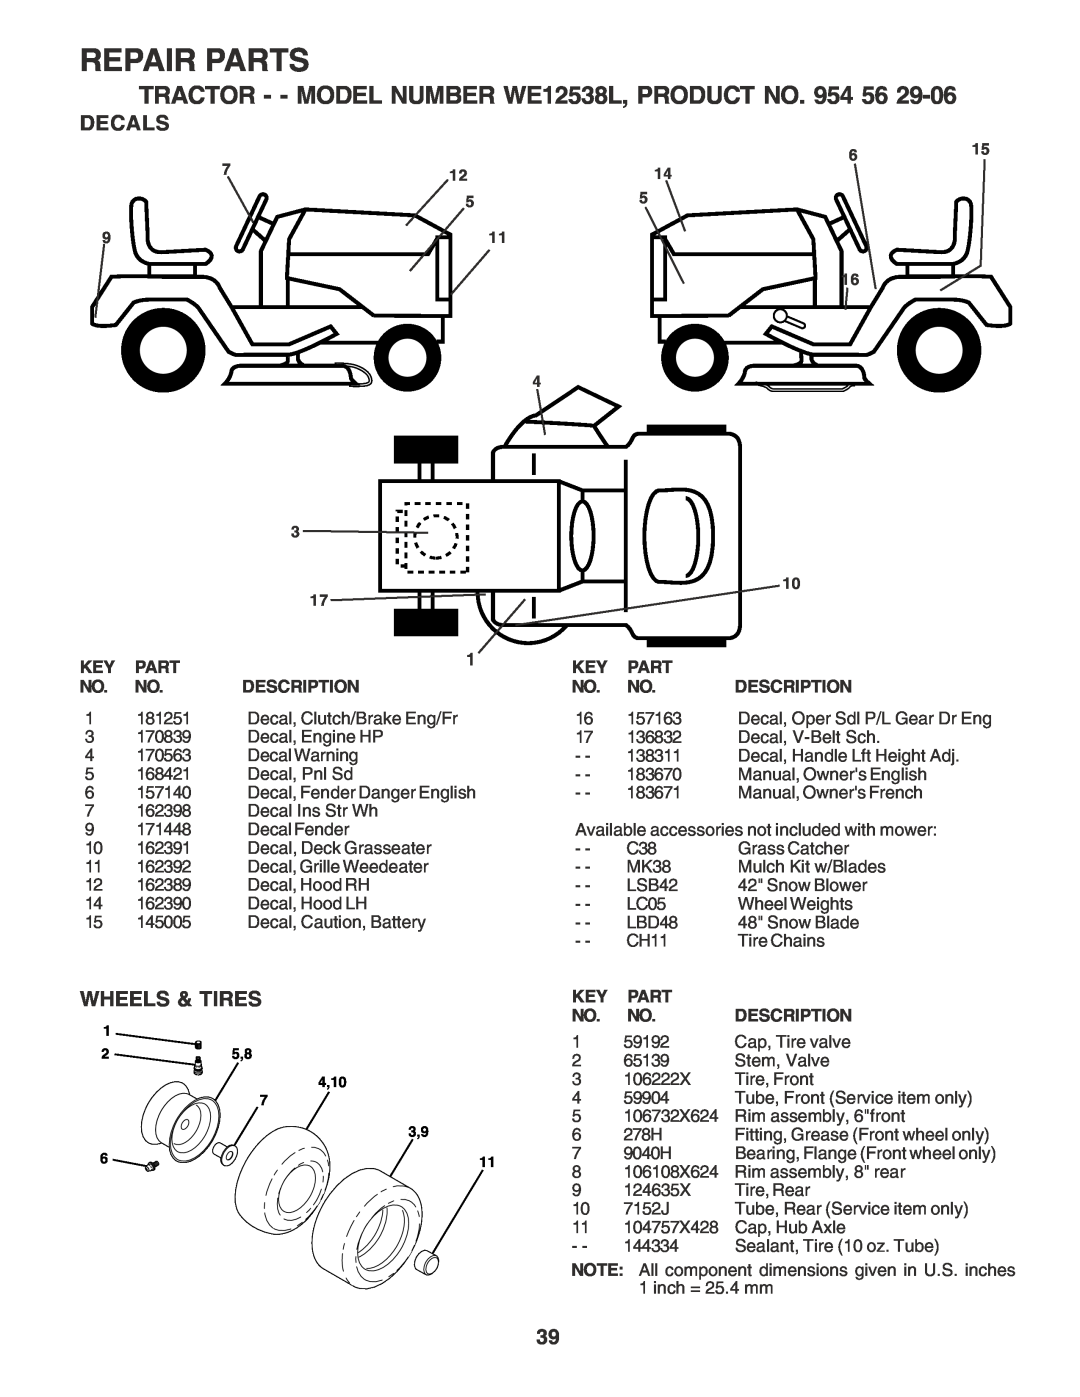 Weed Eater manual Decals, Wheels & Tires, Repair Parts, TRACTOR - - MODEL NUMBER WE12538L, PRODUCT NO, 4,10 